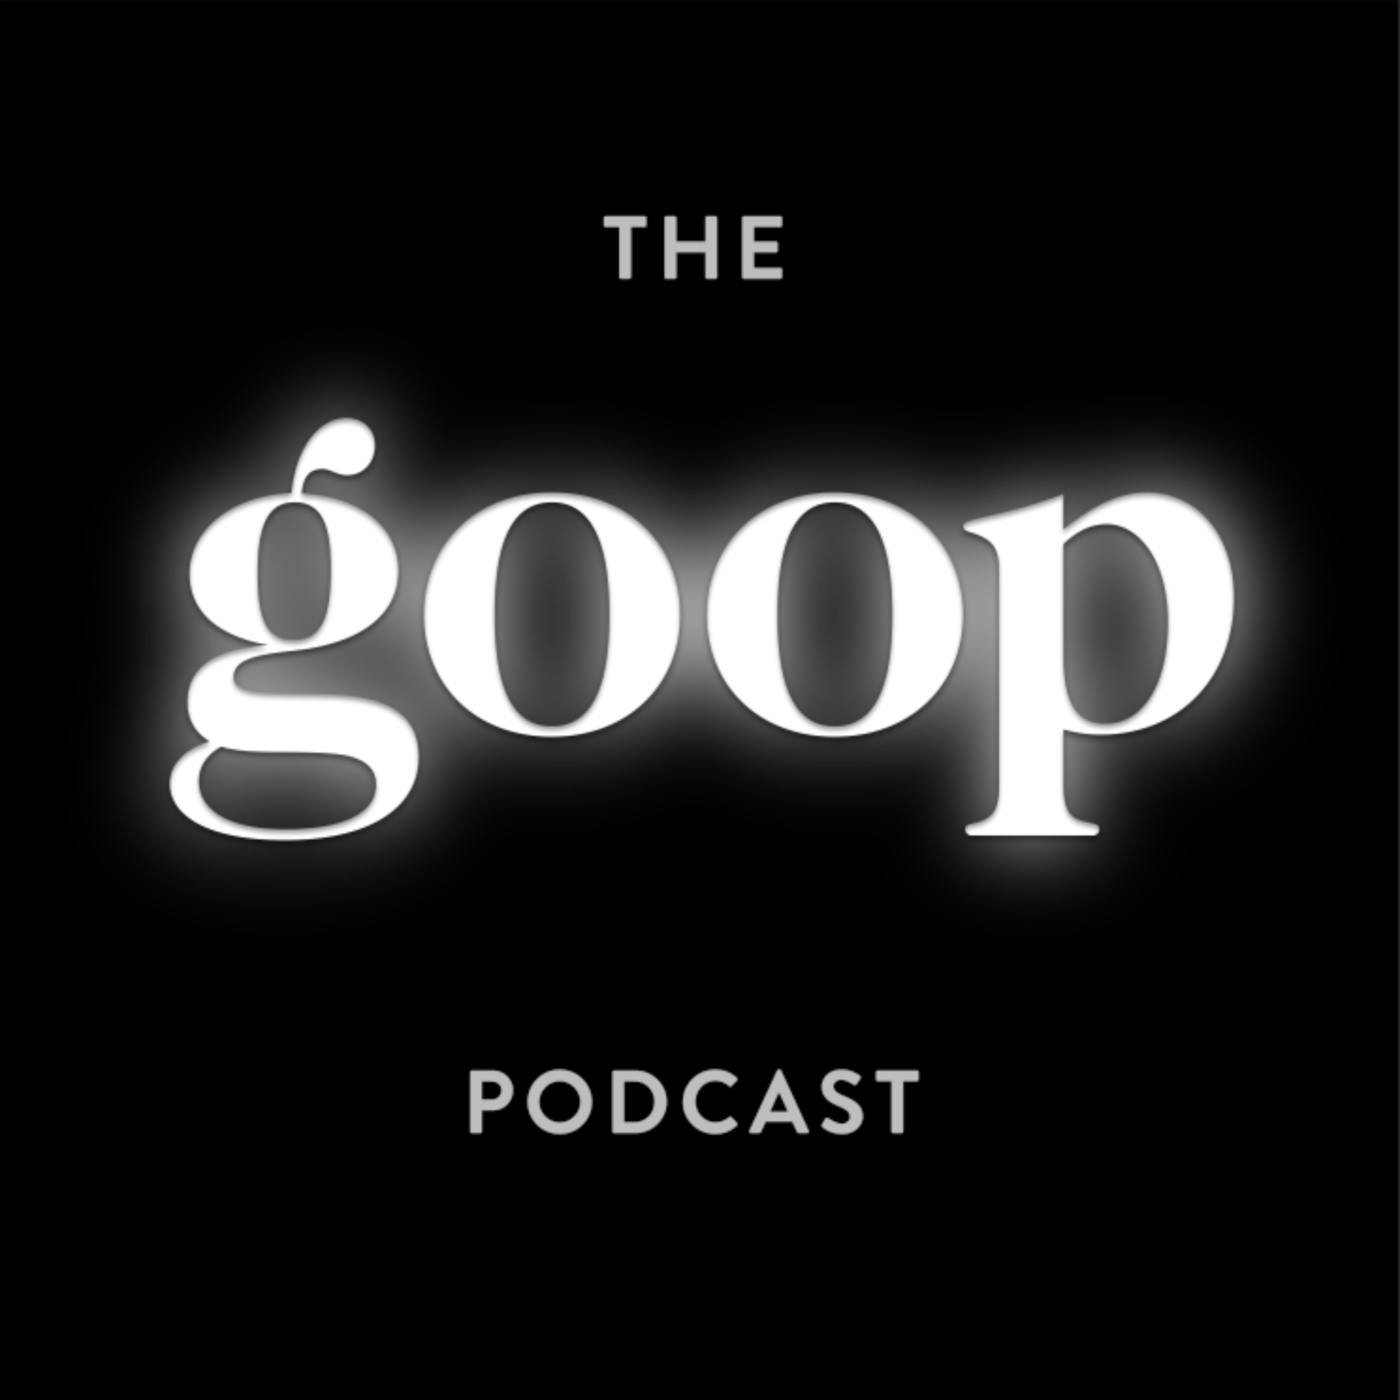 The goop Podcast podcast show image